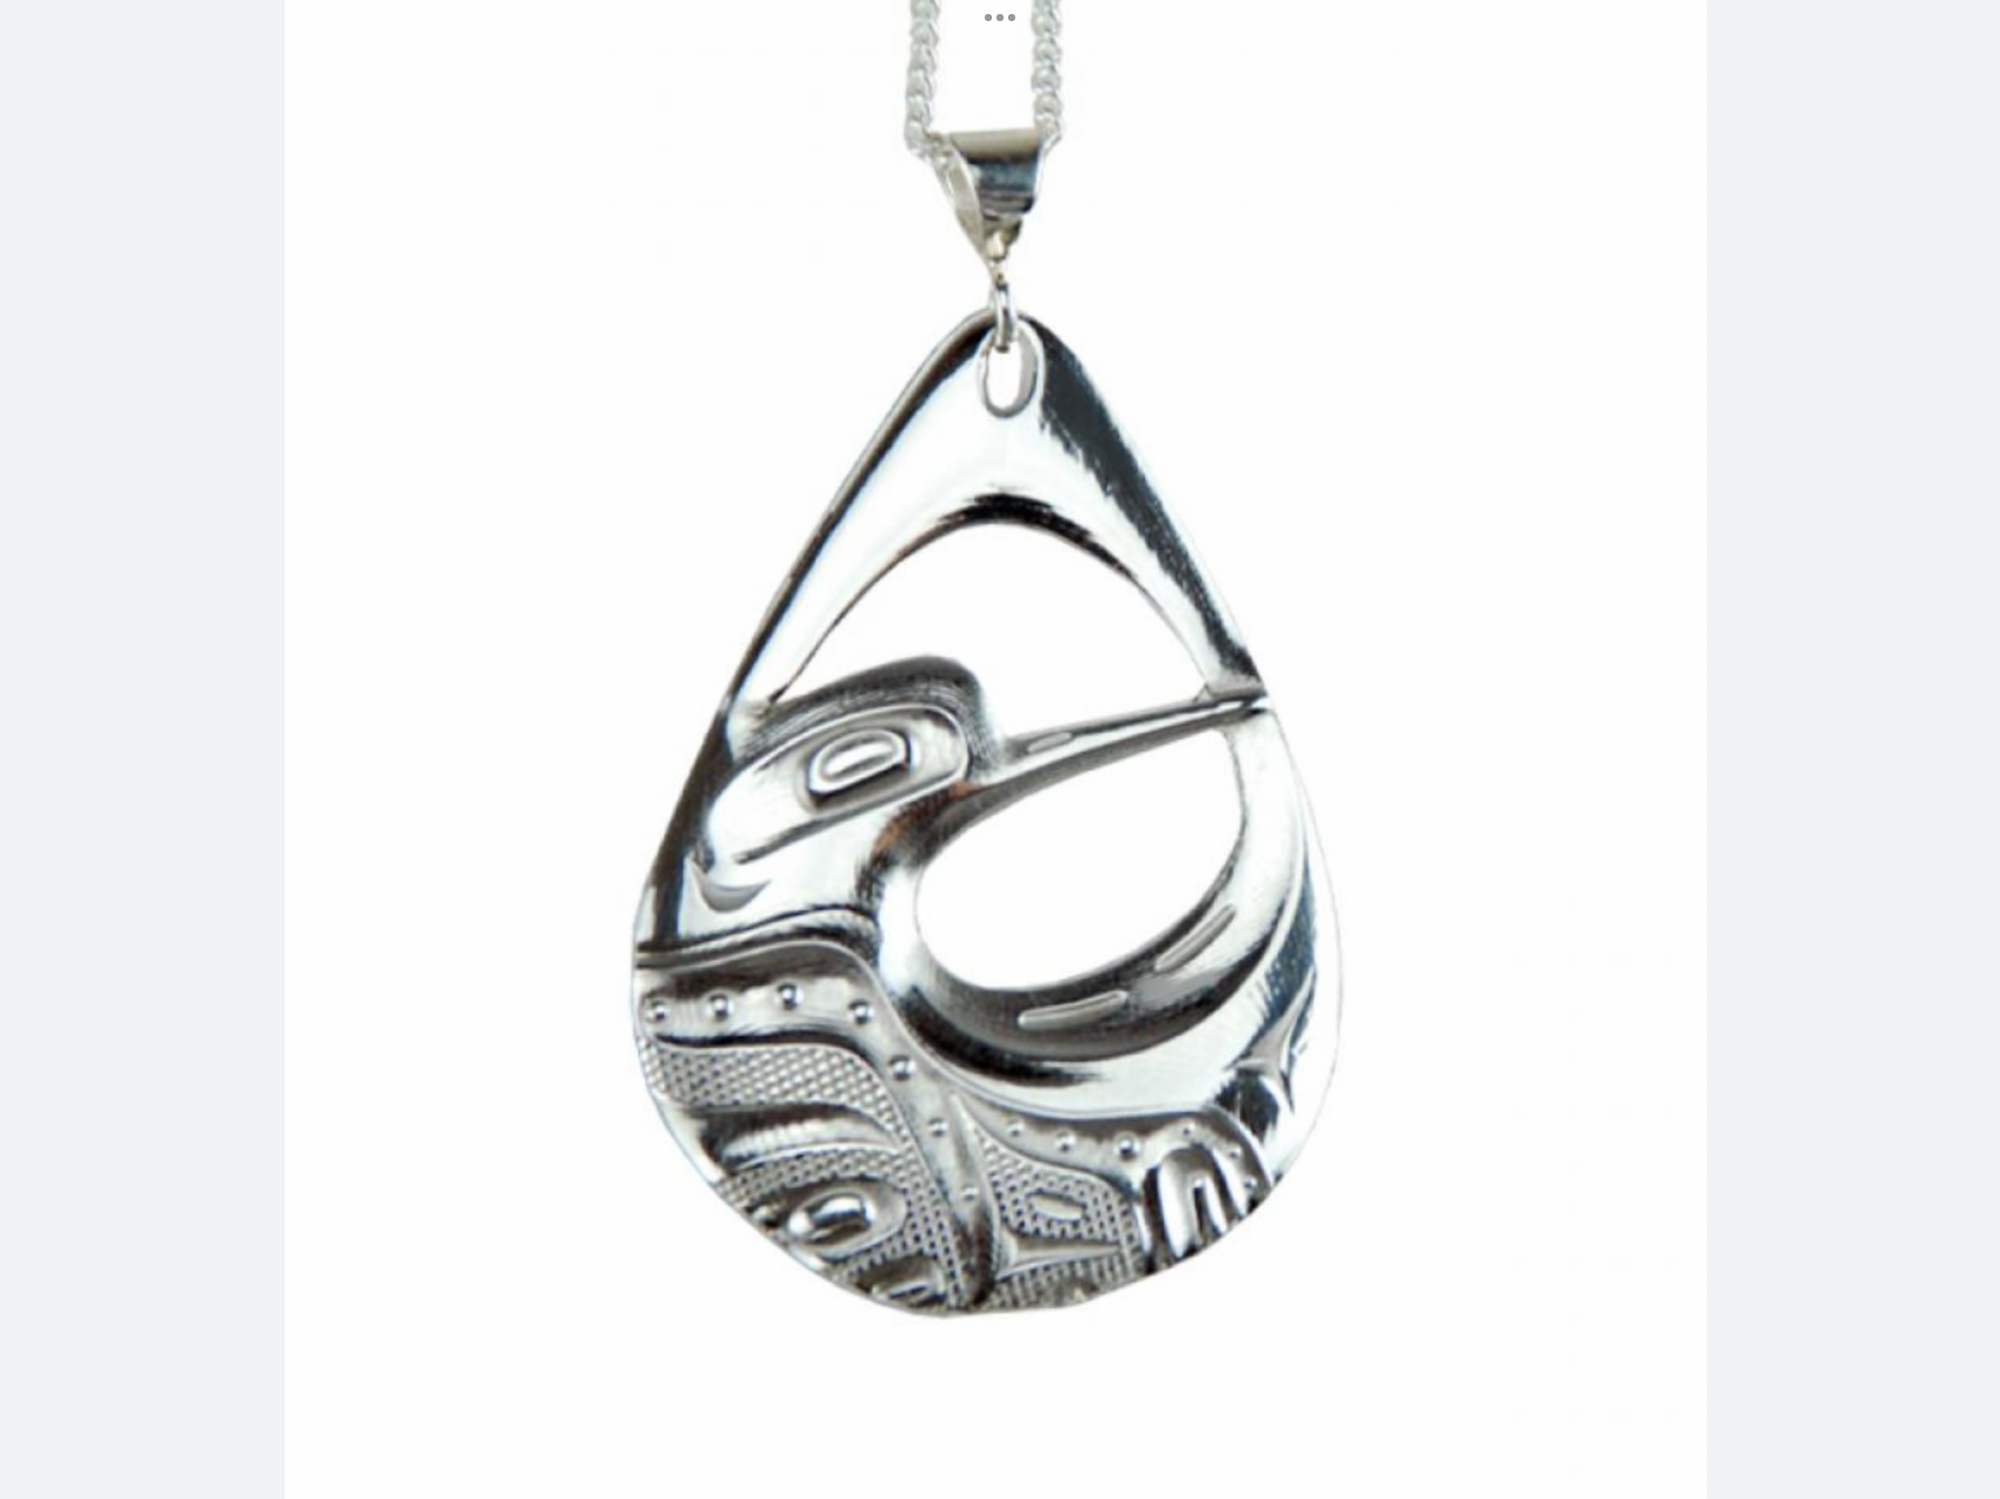 Corrine Hunt Silver Pewter Hummingbird Pendant with Sterling Silver Chain - Corrine Hunt Silver Pewter Hummingbird Pendant with Sterling Silver Chain -  - House of Himwitsa Native Art Gallery and Gifts